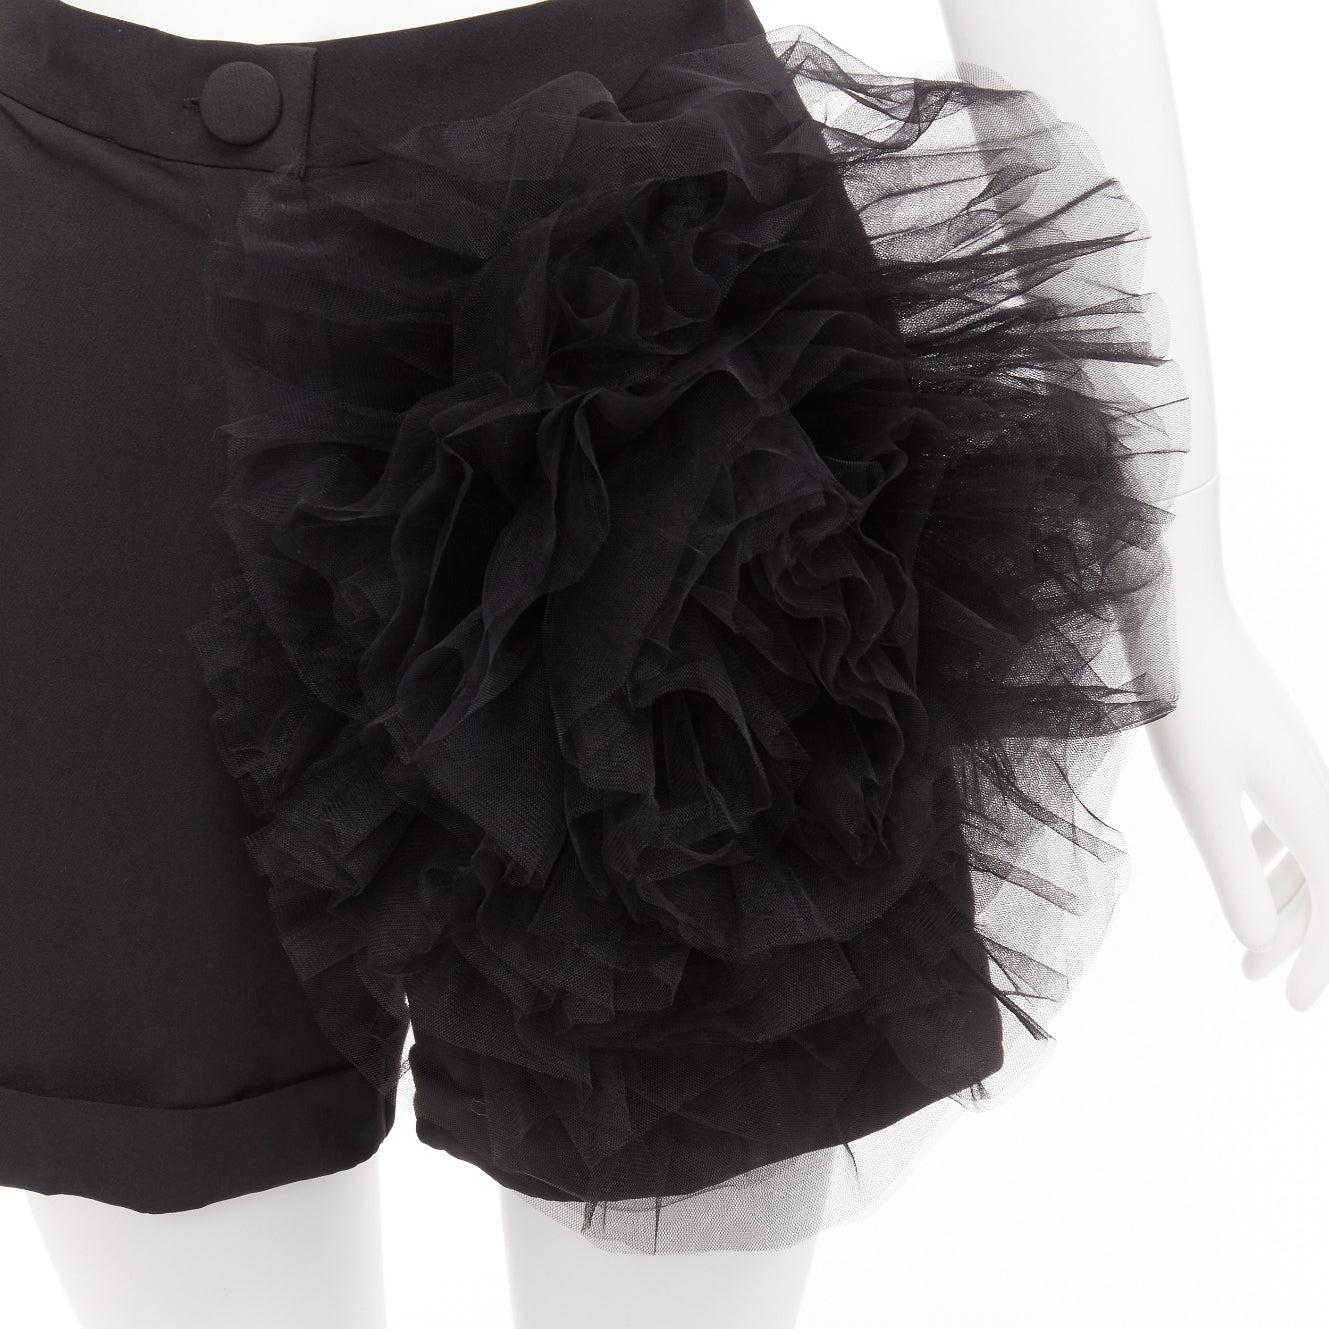 LOULOU STUDIO black oversized tulle flower high waisted cuffed shorts XS
Reference: AAWC/A00872
Brand: Loulou
Material: Polyester, Blend
Color: Black
Pattern: Solid
Closure: Zip Fly
Lining: Black Fabric
Made in: Romania

CONDITION:
Condition: